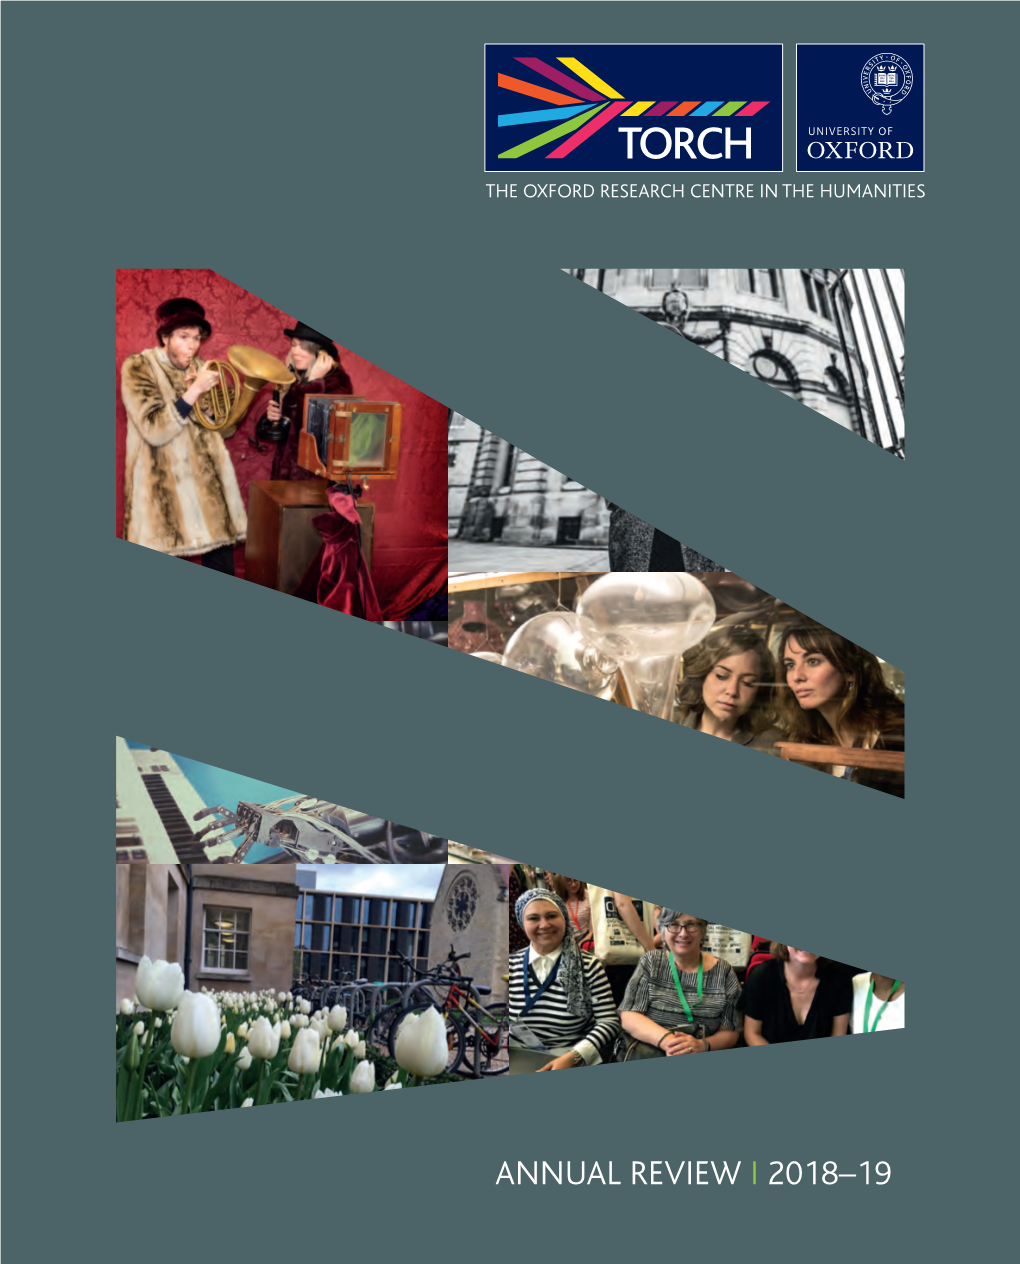 TORCH Annual Review 2018-19